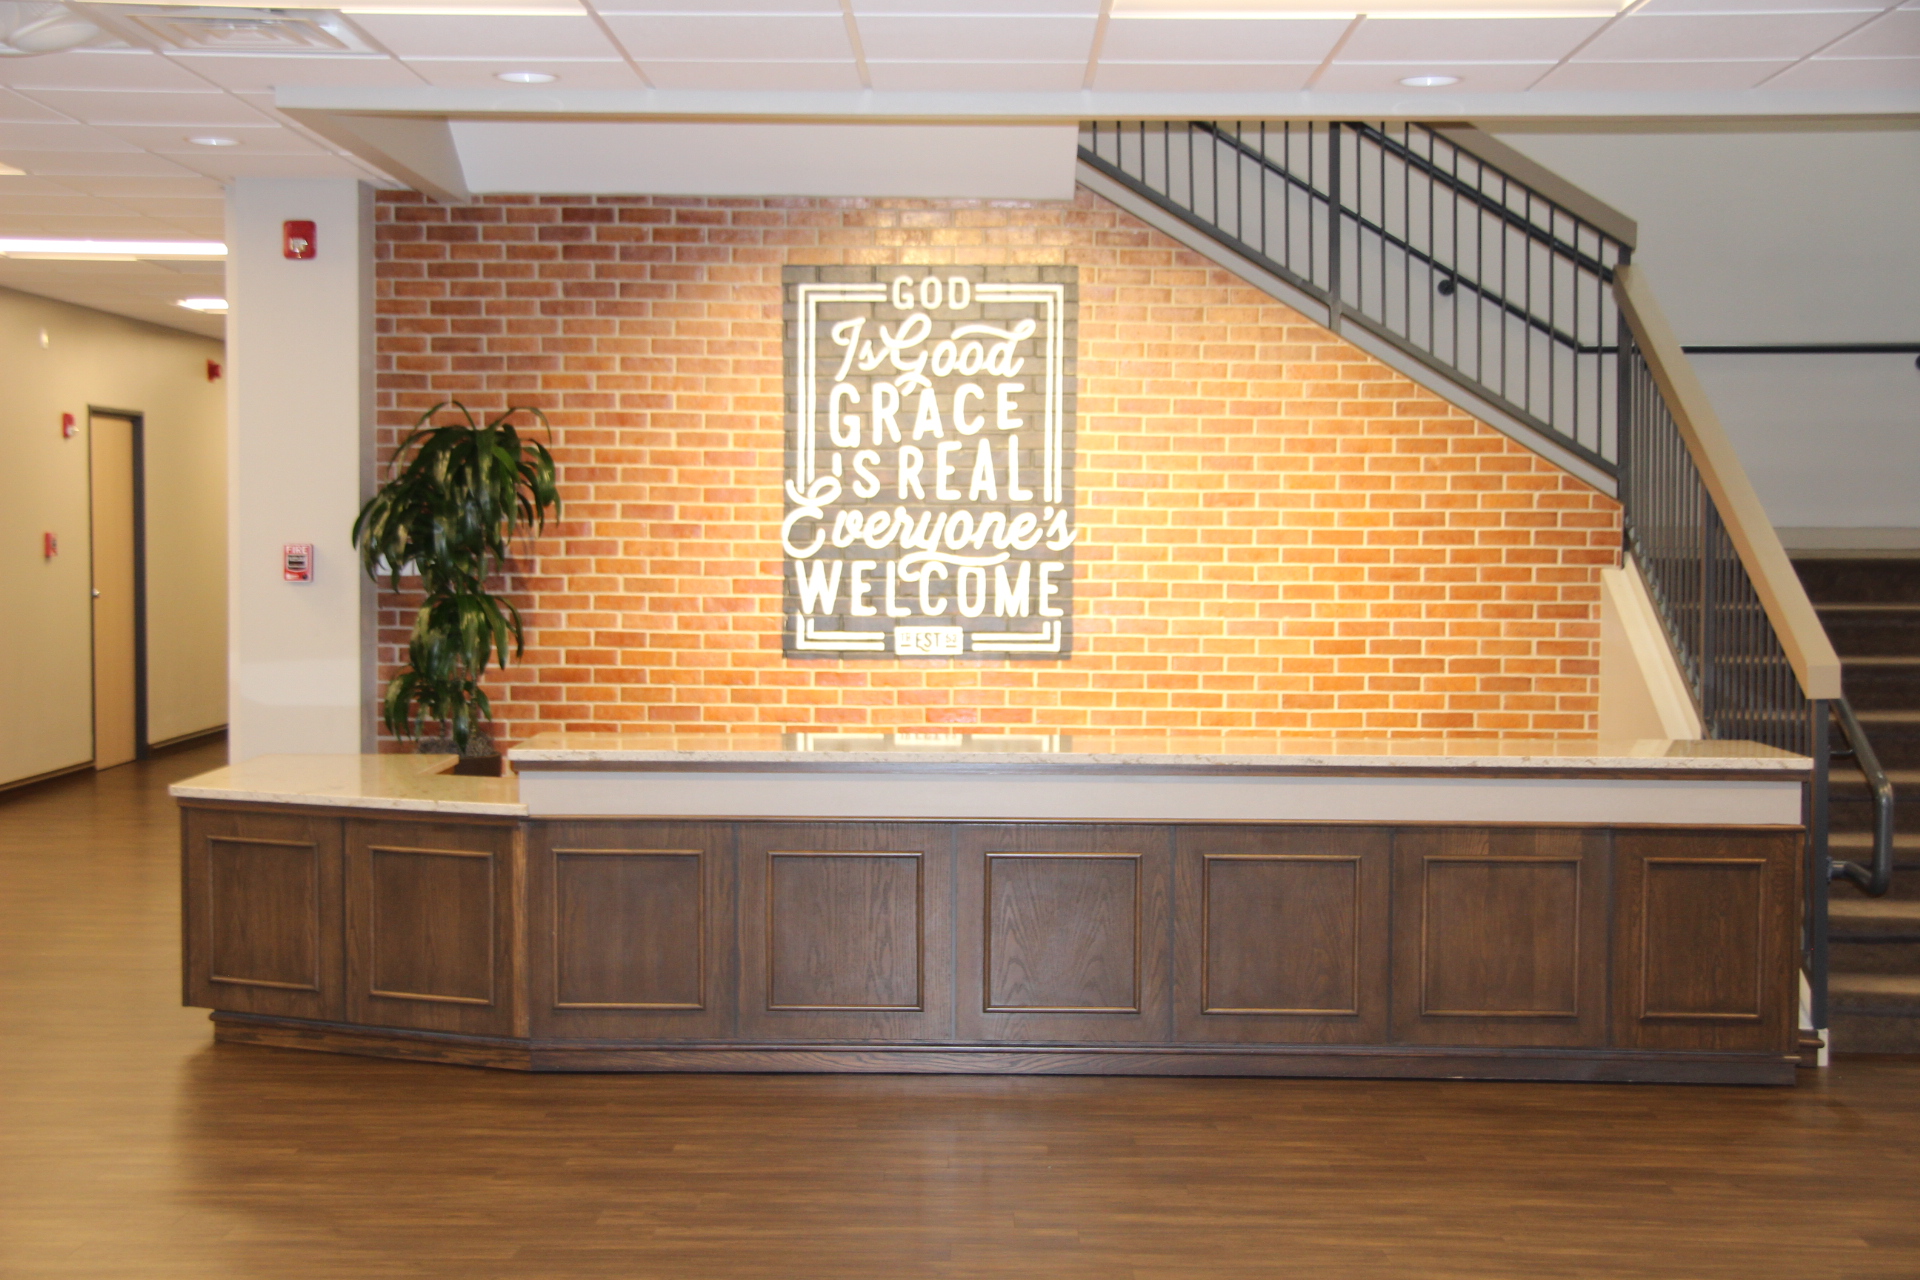 Built Wright Construction - First Woodway Baptist Foyer 2